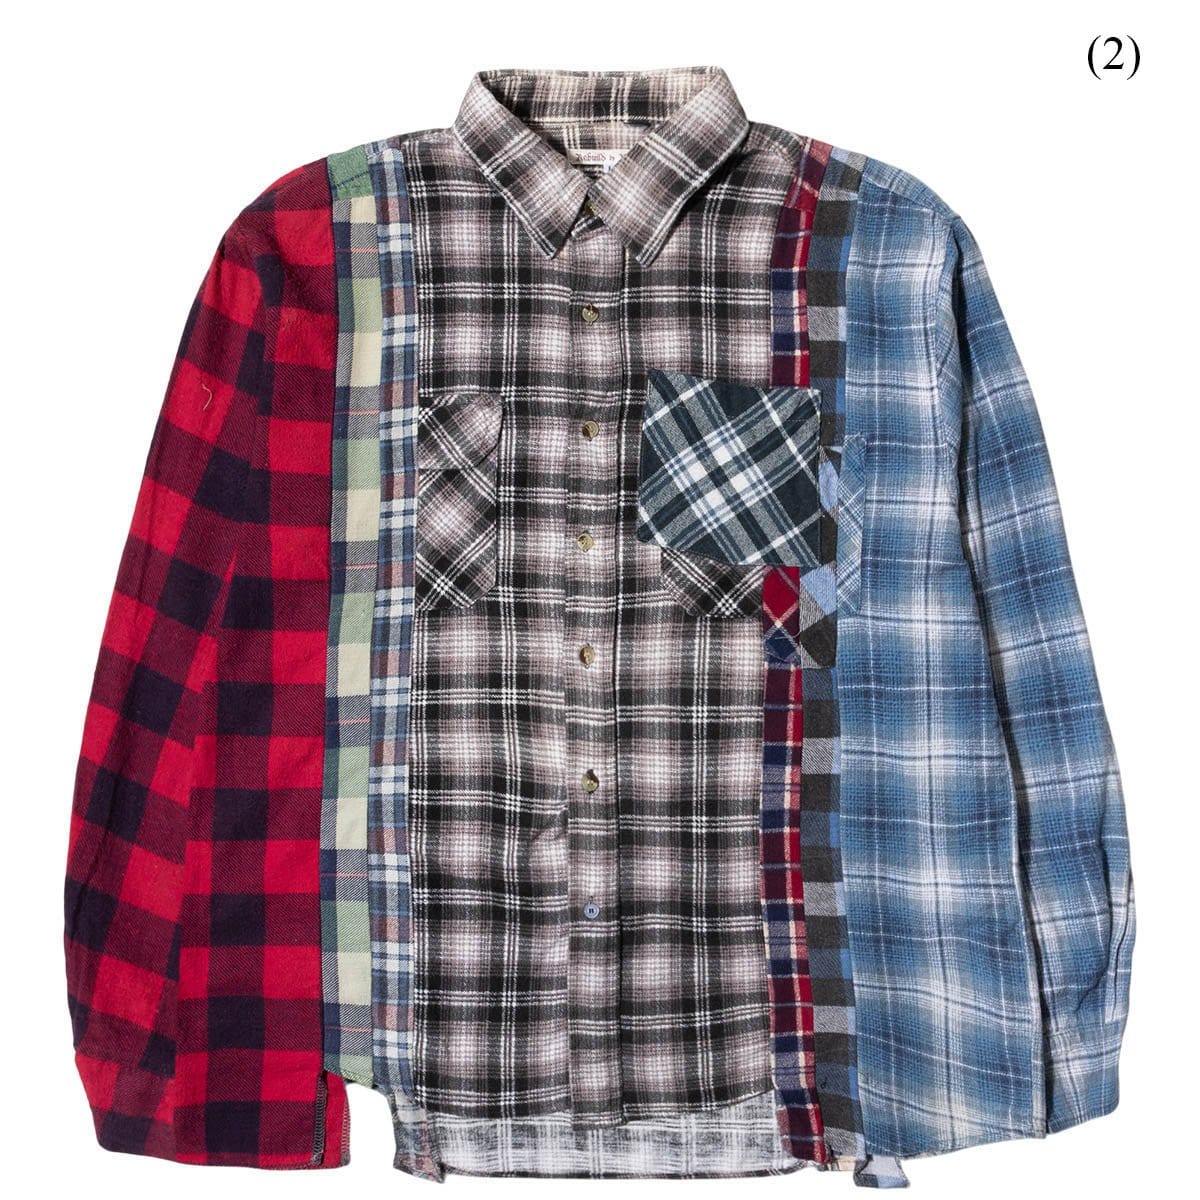 Needles Shirts 7 CUTS FLANNEL SHIRT FW21 (LARGE/MULTIPLE STYLES)